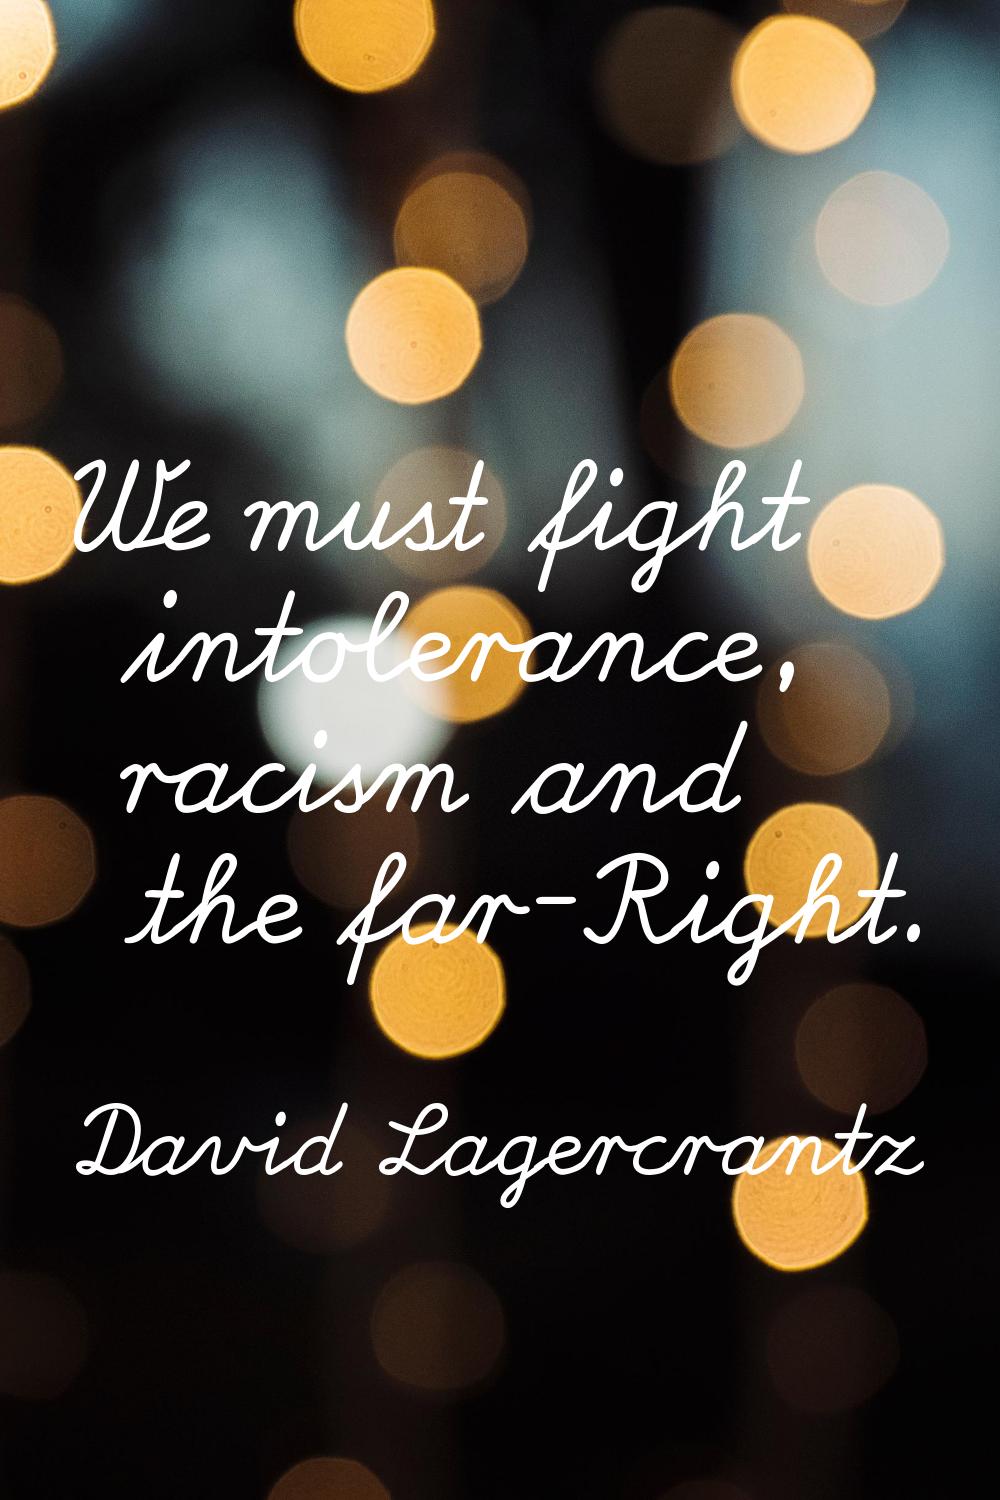 We must fight intolerance, racism and the far-Right.